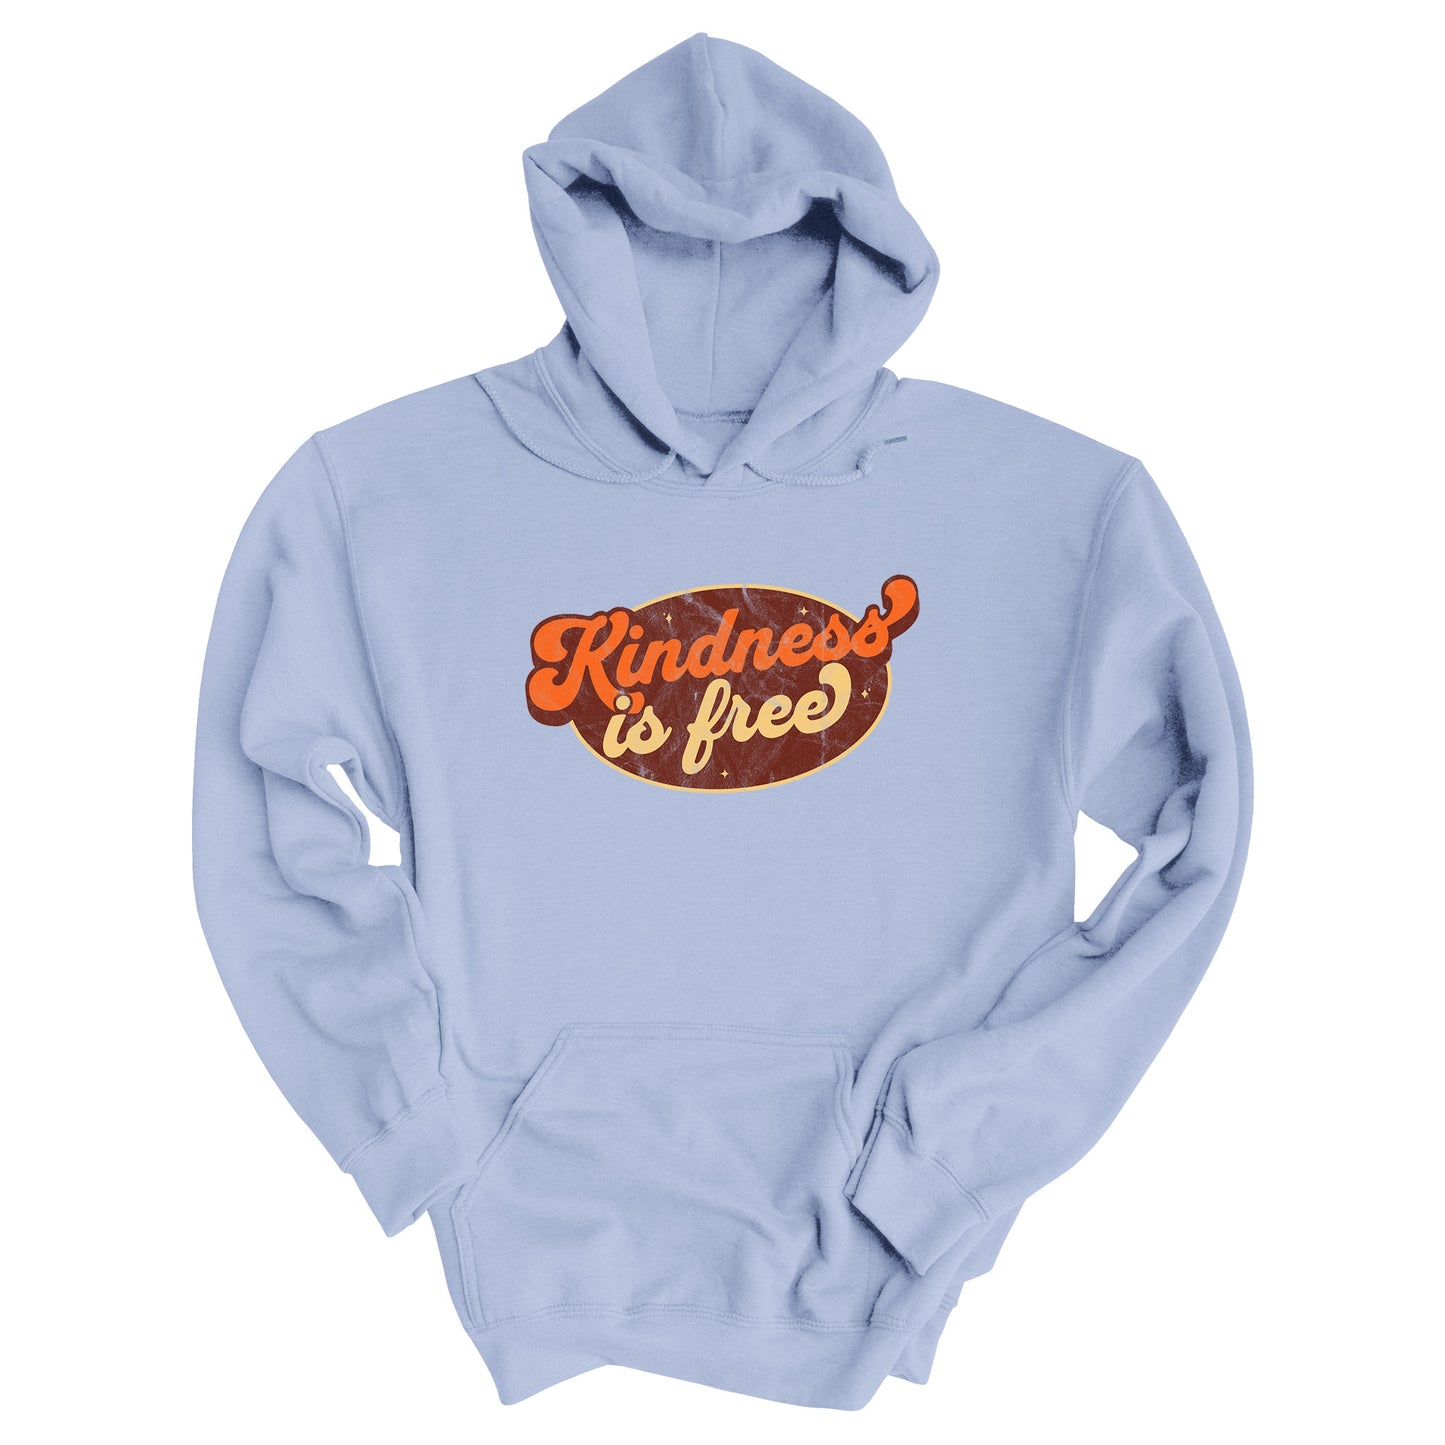 Light Blue unisex hoodie with a retro graphic that says “Kindness is free.” The text is in a script font with a brown oval behind it. The “k” and the “s” in the word “Kindness” are not contained inside the oval. The graphic is also distressed to add to the retro feel.